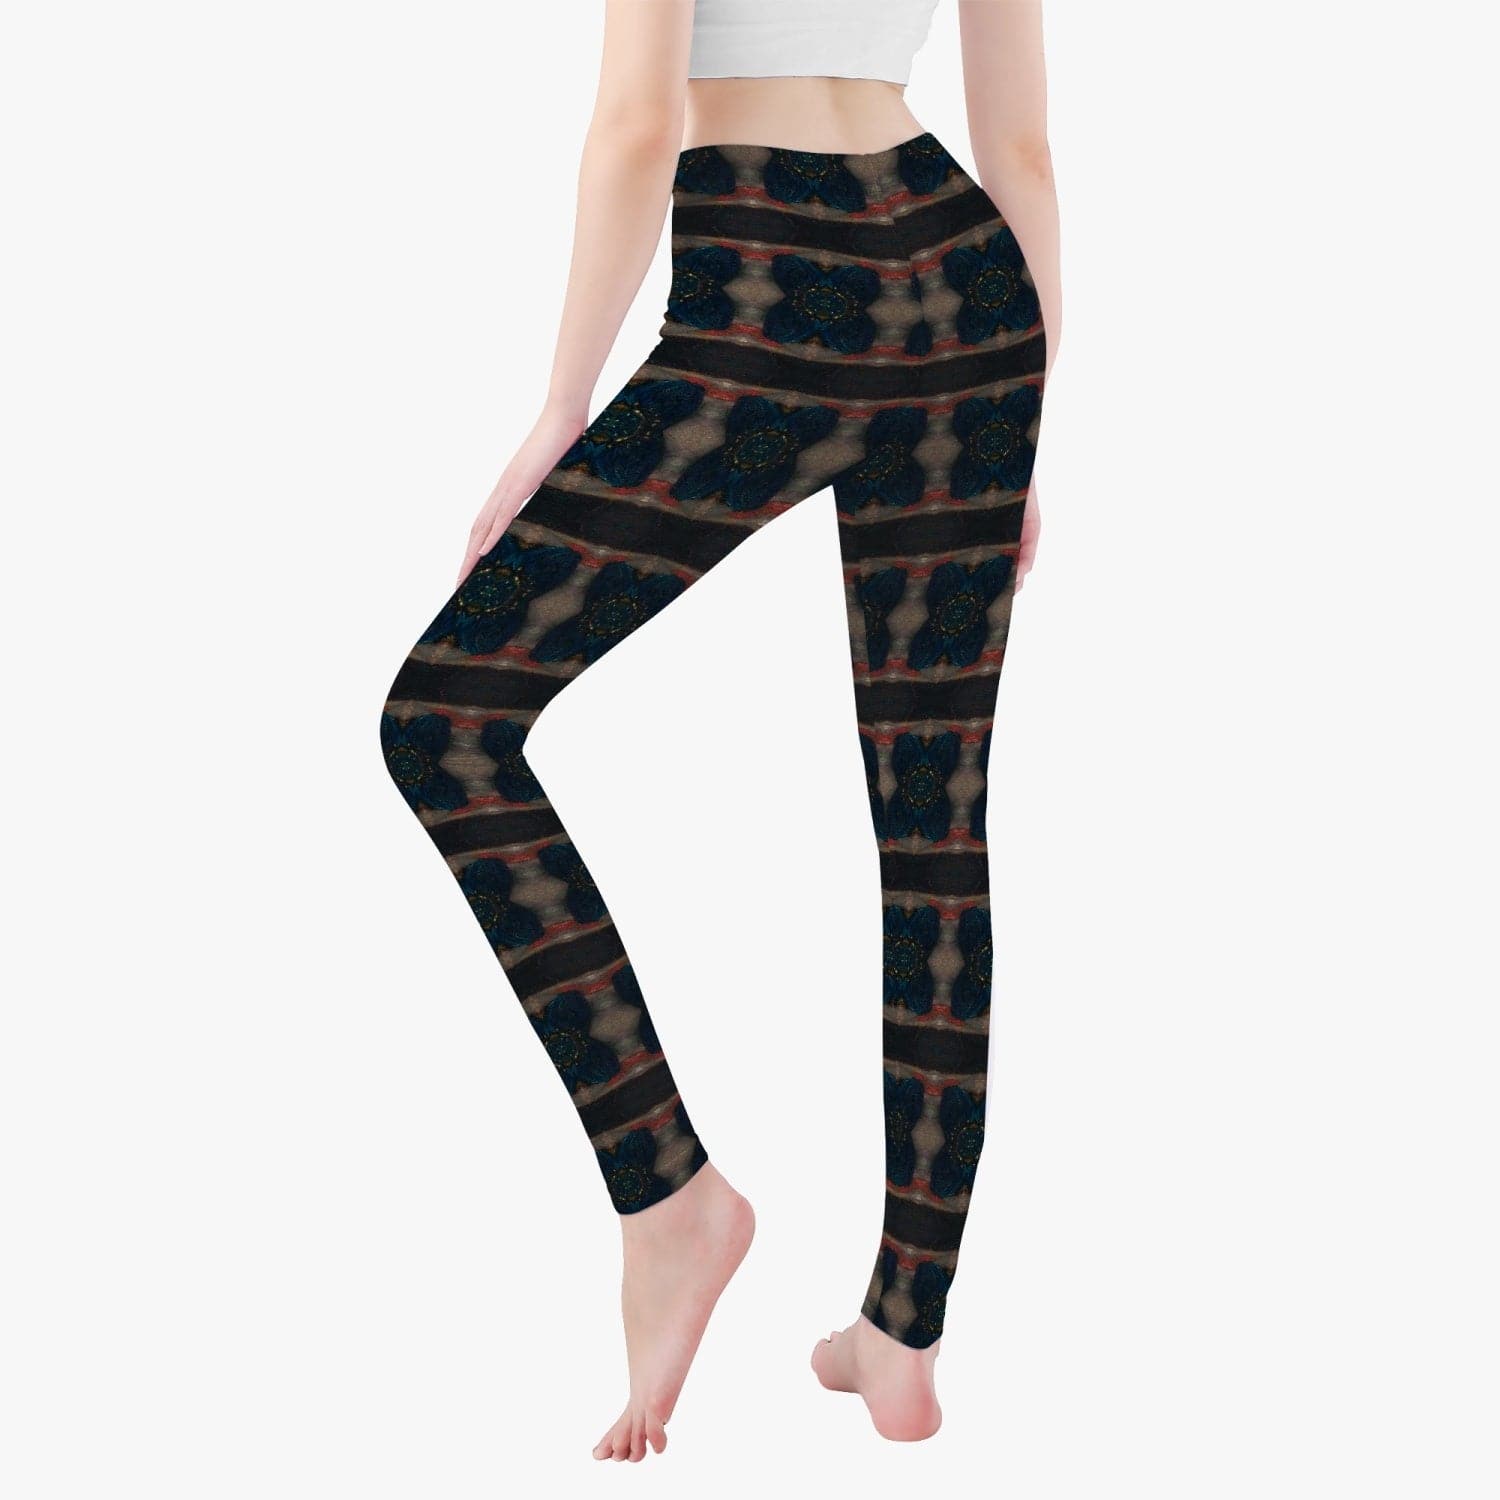 Building the Pillars Black with Subtle Red and Gold Patterned. Yoga Pants/Leggings for Women, by Sensus Studio Design